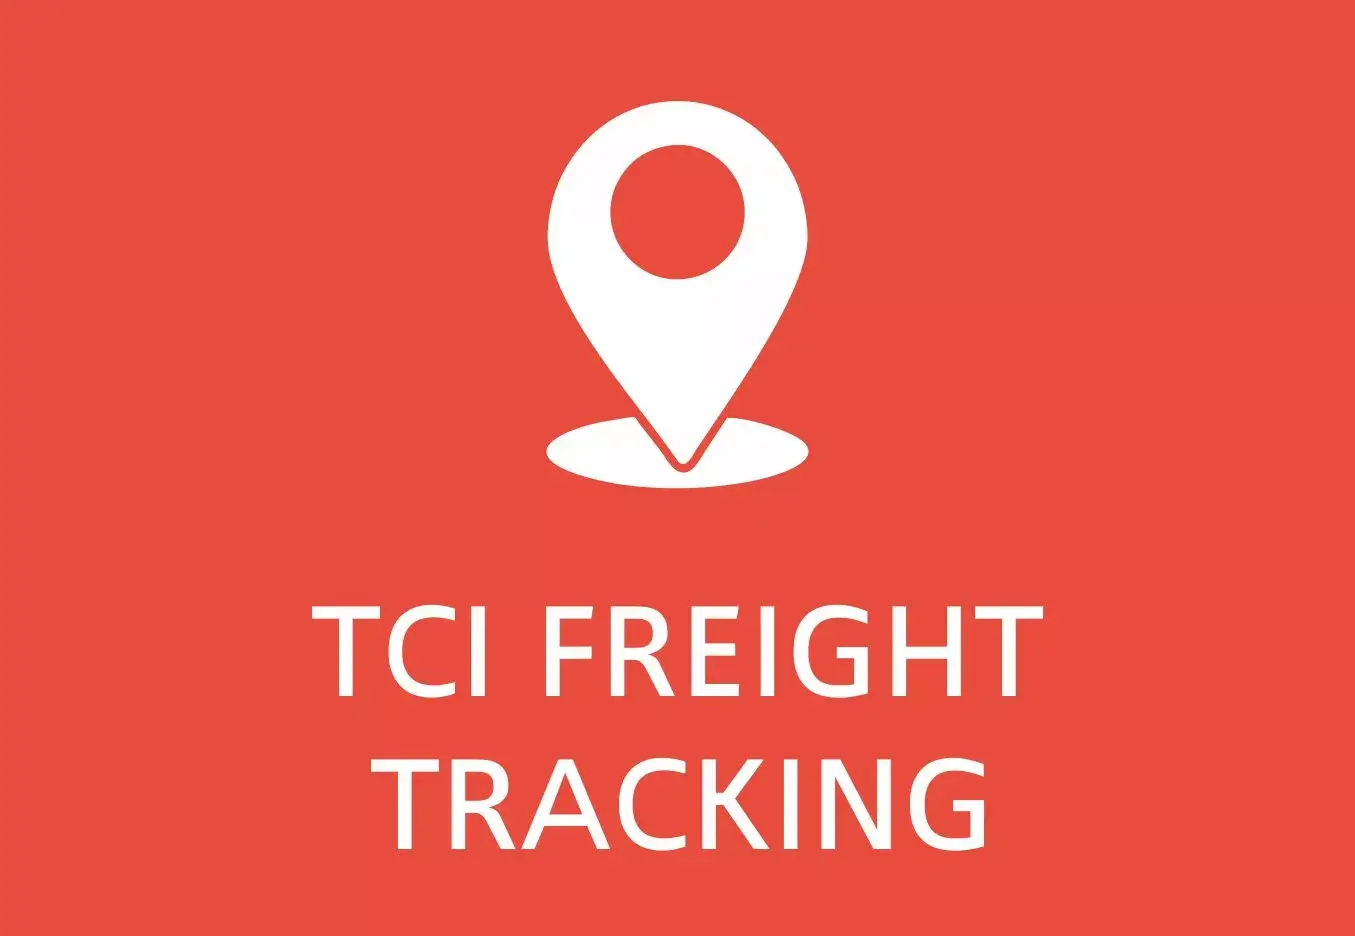 TCI freight tracking thumb